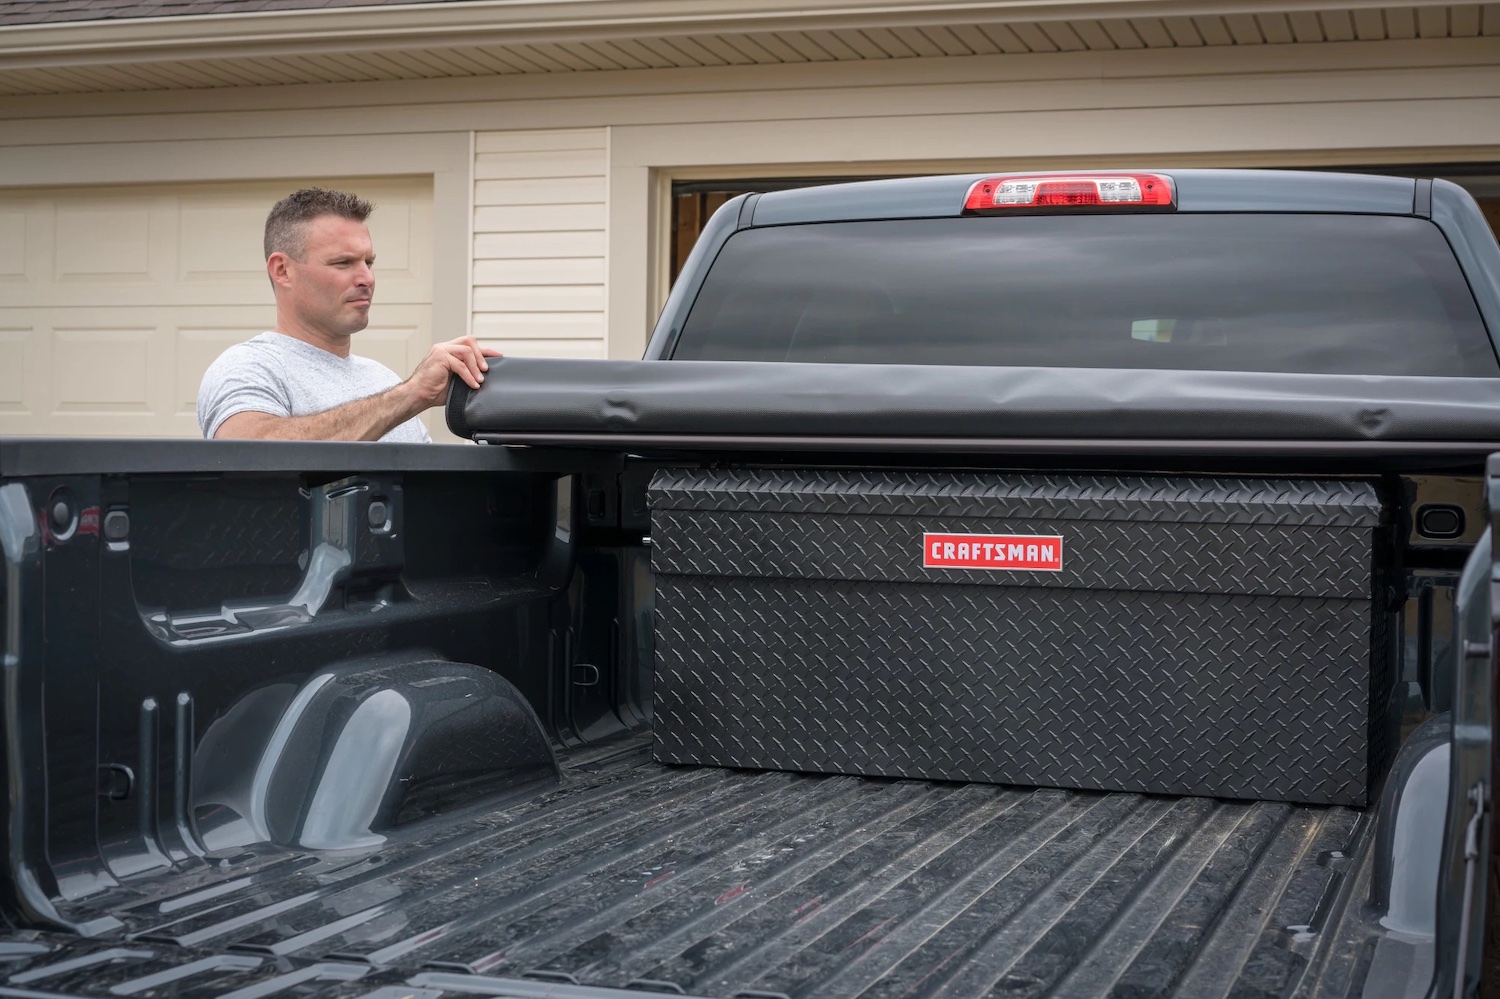 Man rolling up the tonneau cover on his pickup truck to reveal a Craftsman vault-style locking tool chest in the bed.